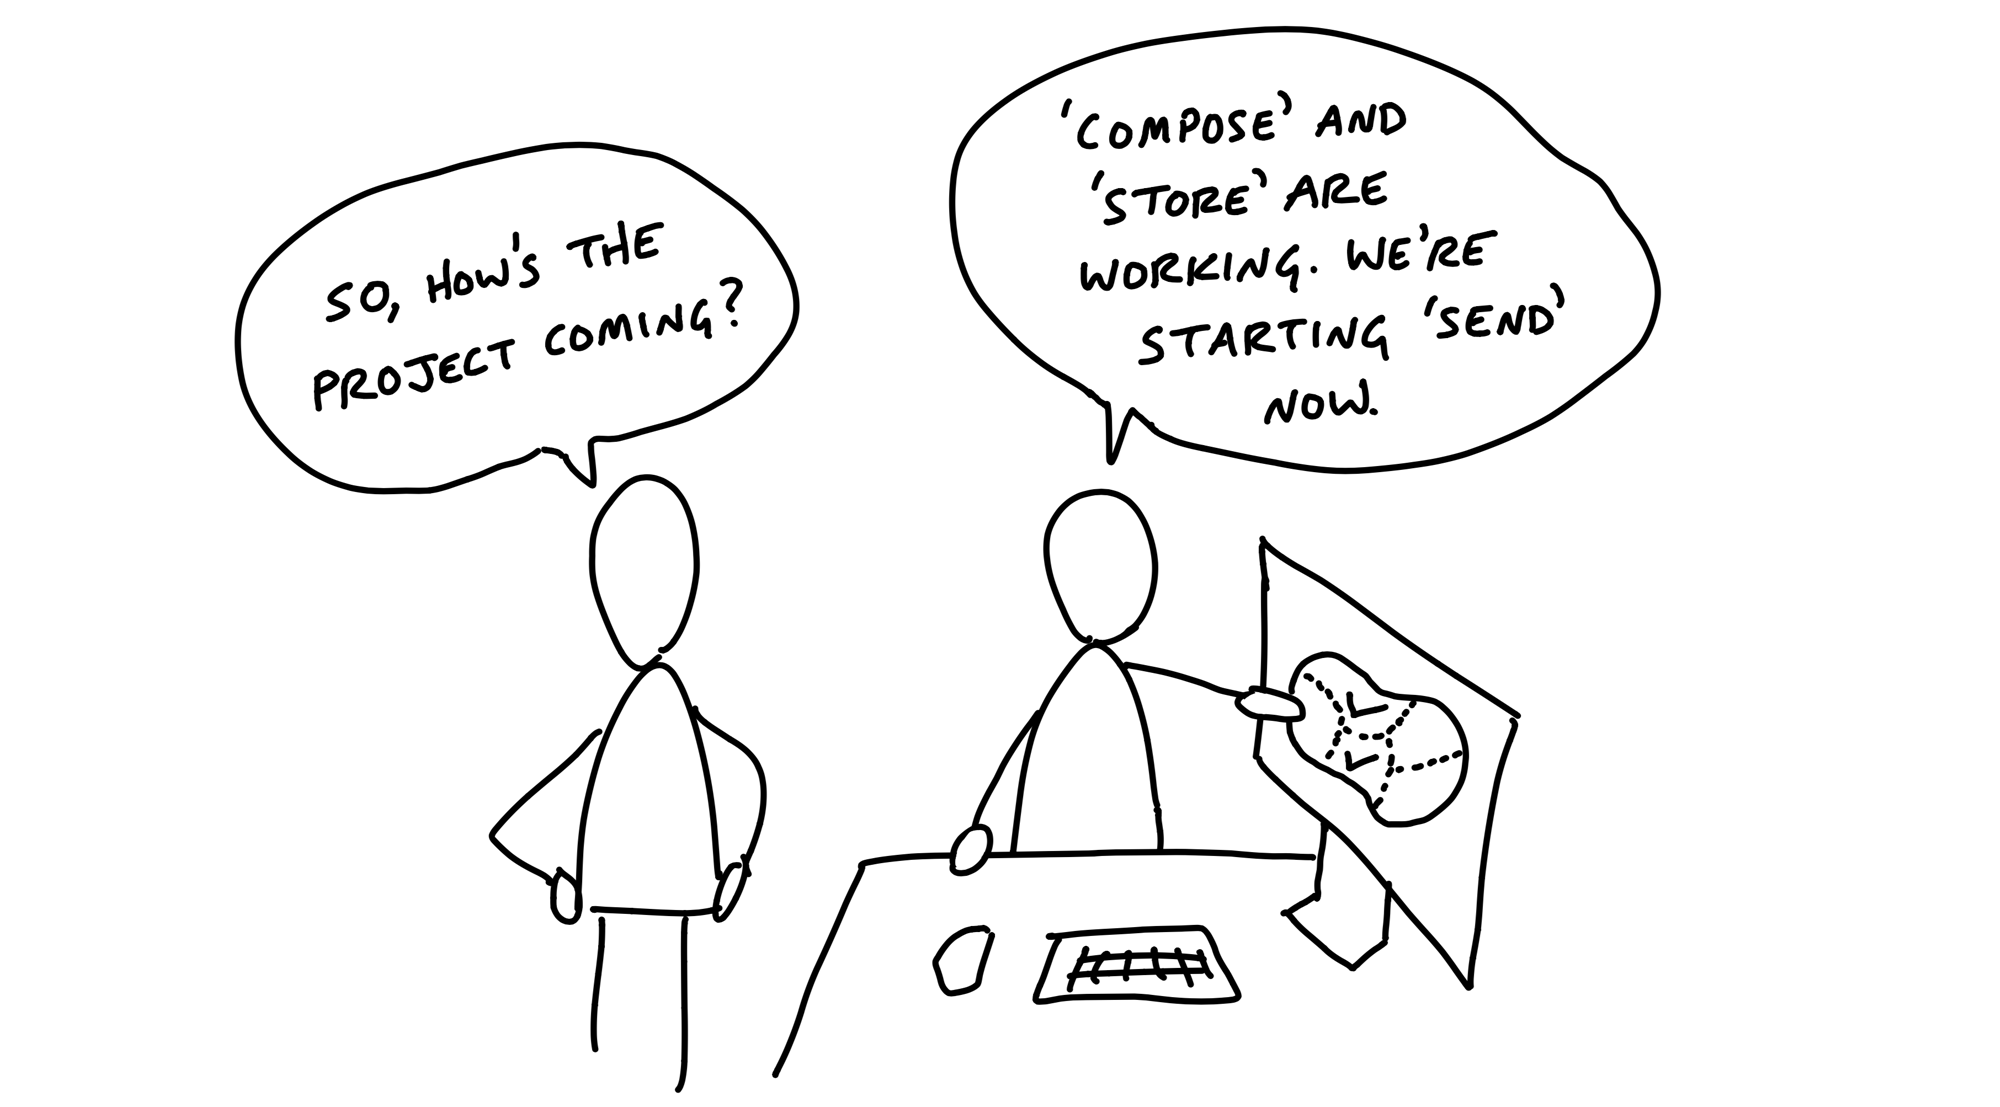 Cartoon. The same figure as in the last chapter stands beside the desk of another figure. Hands on hips, the first figure asks: So, how's the project coming? The figure on the right points to a monitor with a map drawn. The map outlines territories, some of them with checkmarks inside. A speech bubble says: 'Compose' and 'Store' are working. We're starting 'Send' now.